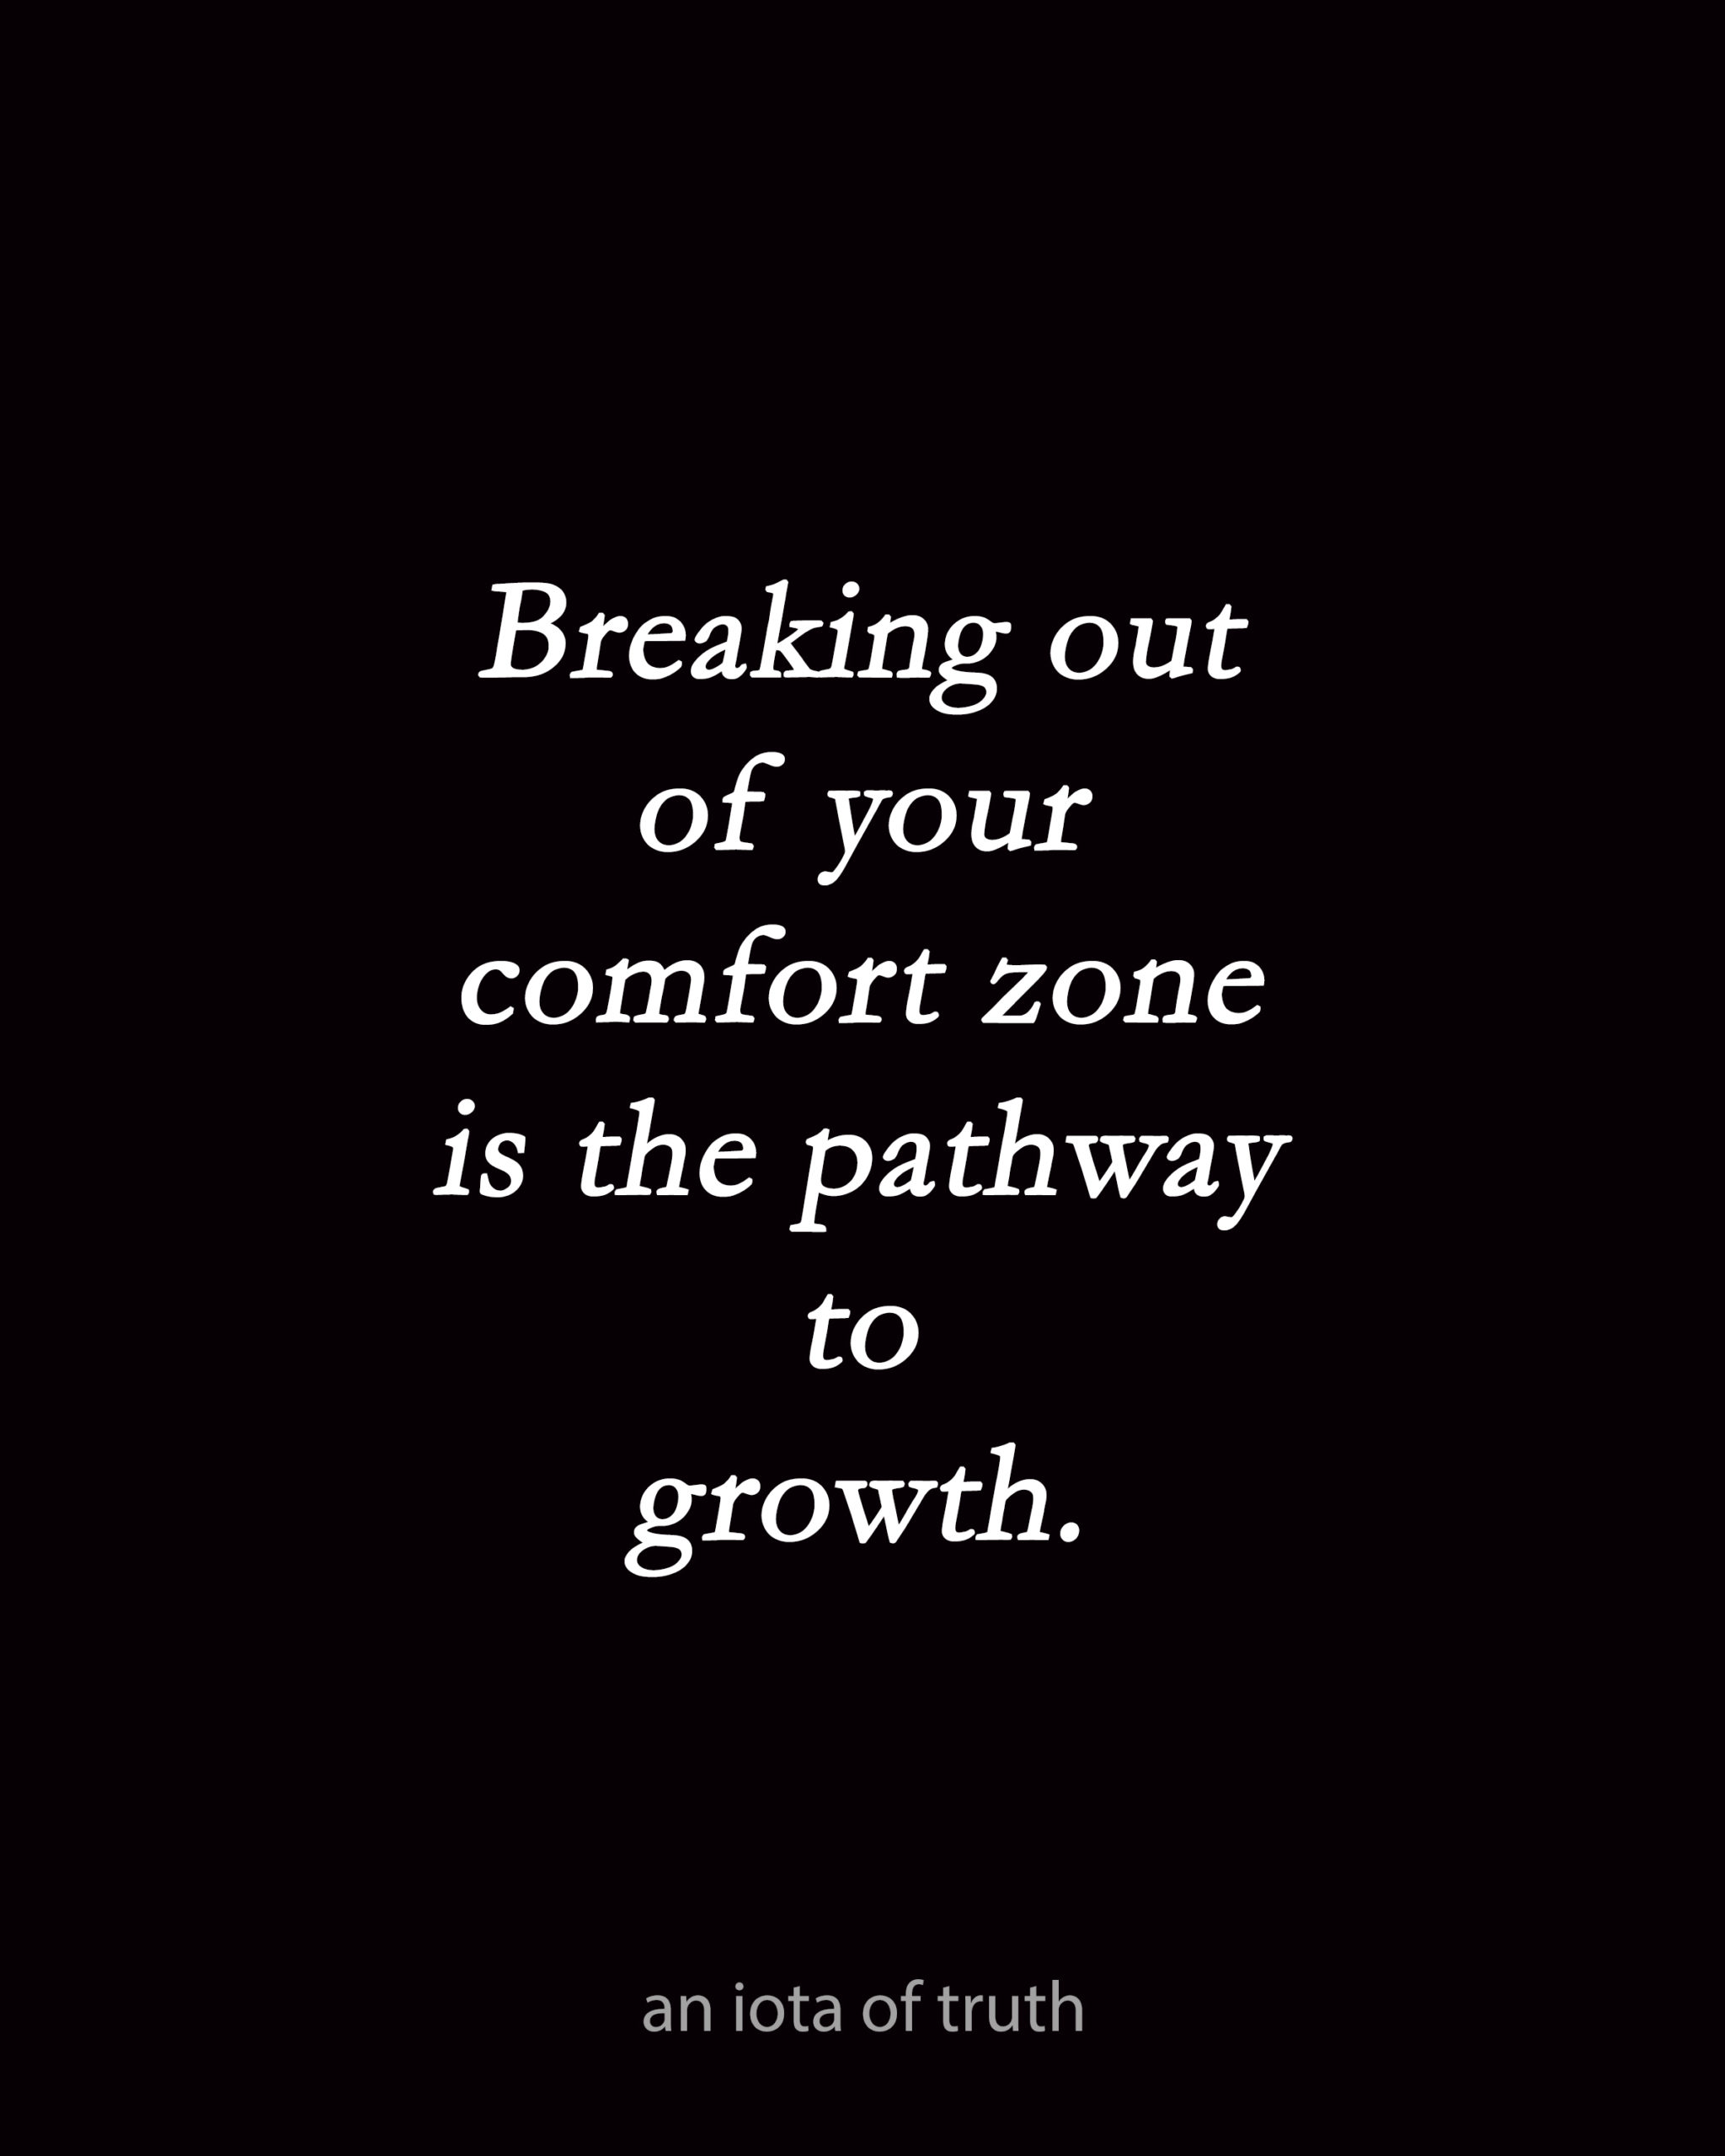 Breaking out of your comfort zone is the pathway to growth.